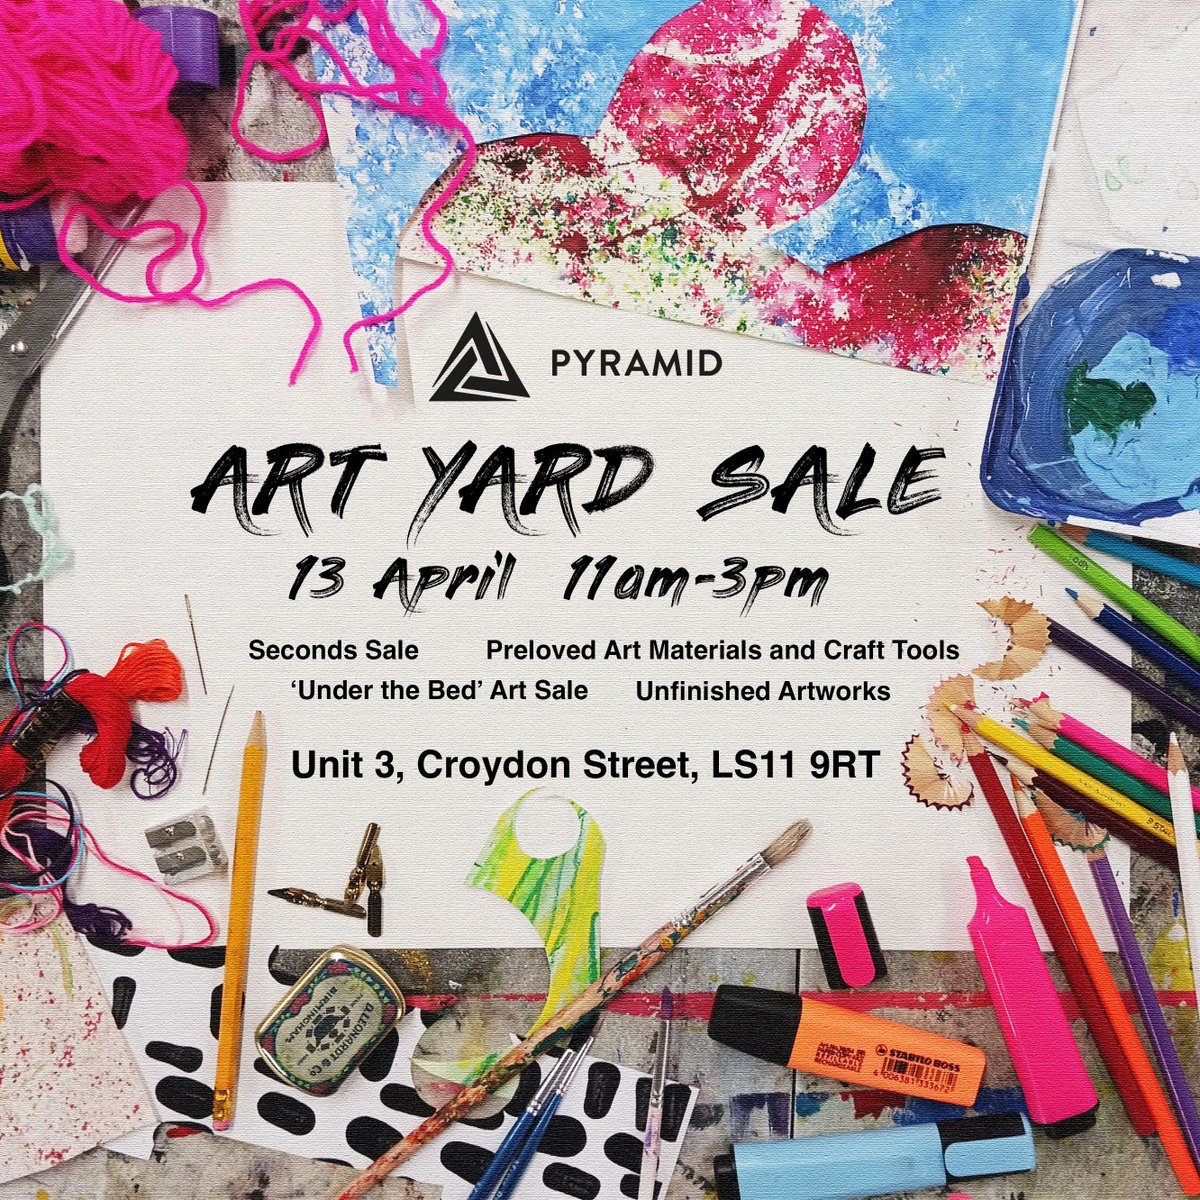 This Saturday, 13 April - @Pyramid_of_Arts Art Yard Sale. Chance to buy preloved art materials, finished and unfinished artworks, and to support Pyramid. It's at Pyramid's studio: Unit 3, Croydon Street, LS11 9RT. From 11am to 3pm.